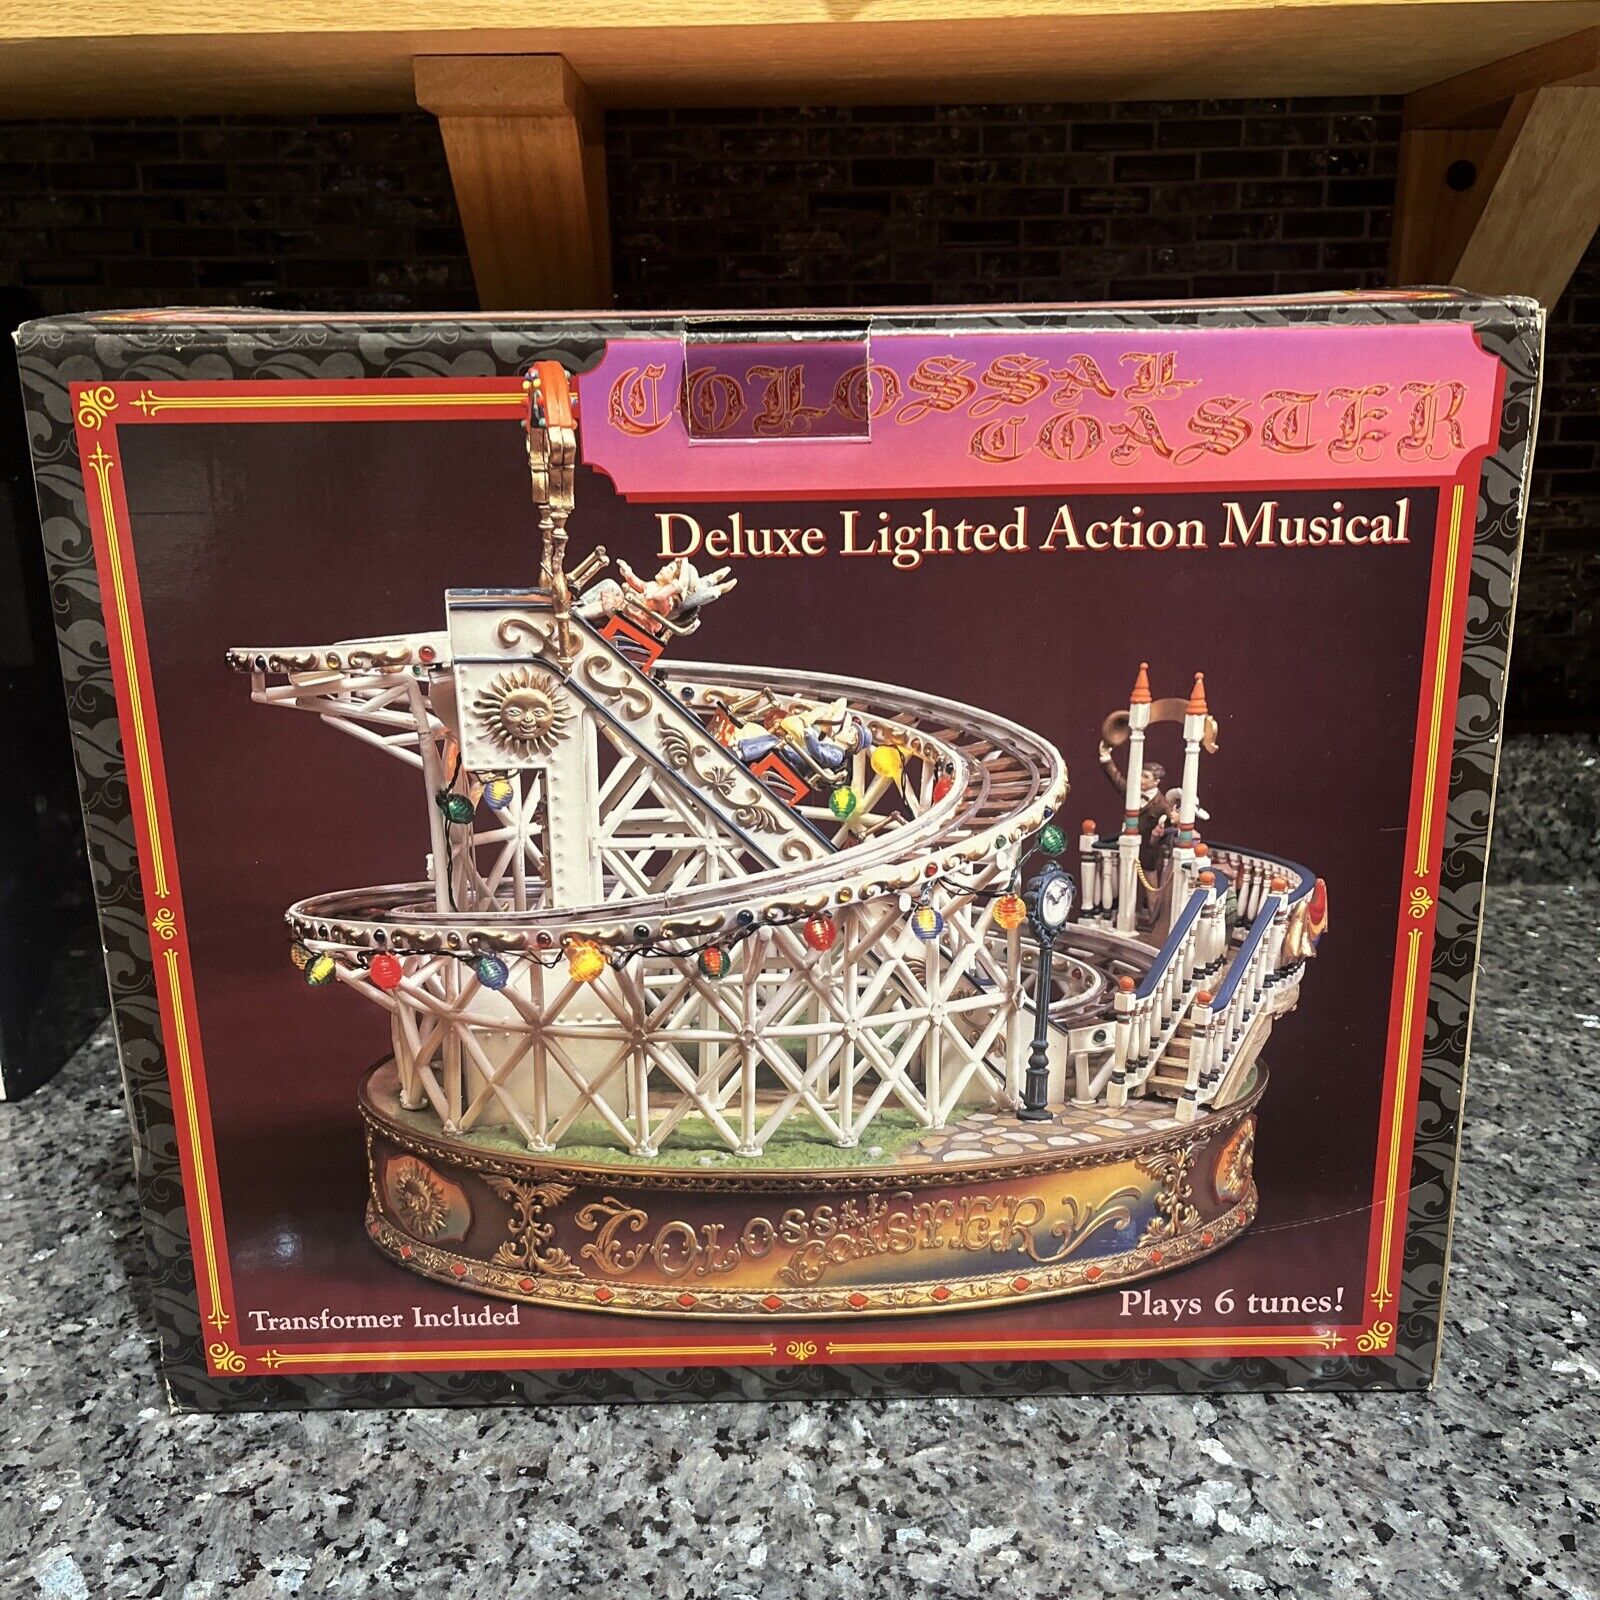 Enesco Victorian Colossal Coaster Deluxe Lighted Action Musical Music Box New